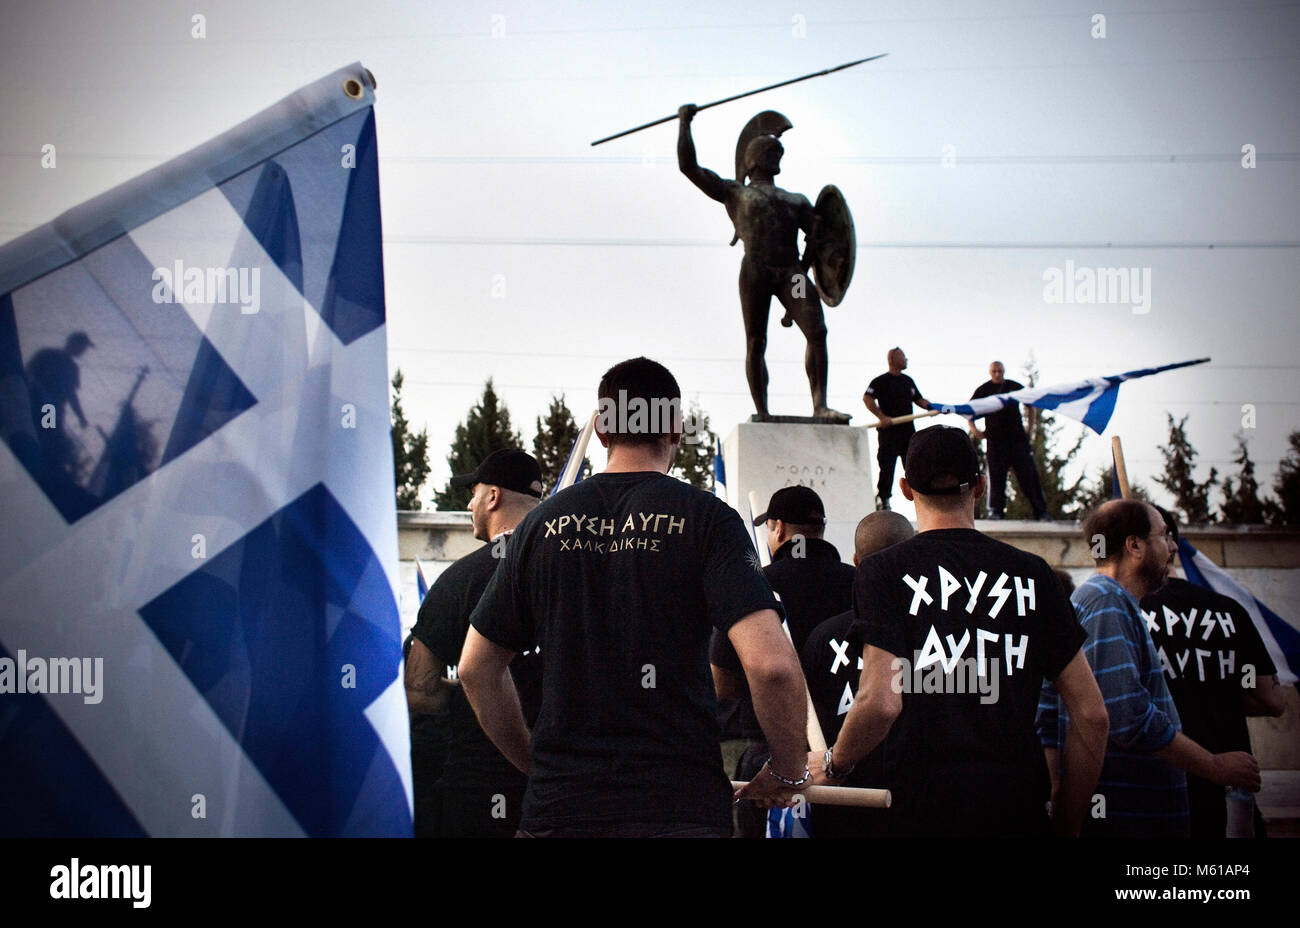 Greece : Golden Dawn -  25/08/2012  -  Greece / Thermopylae  -  The Greek ultran-nationalist party Golden Dawn rallied at Thermopylae, congregating around a statue of King Leonidas of Sparta, whose warriors stood up to the enormous invading army of the Persian King of Kings Xerxes in the year 480 B.C, on Aug. 25, 2012 According to recent polls, Golden Dawn is now the third most popular political part in Greece, drawing its strength from a virulently anti-immigrant platform.   -  Stefania Mizara / Le Pictorium Stock Photo